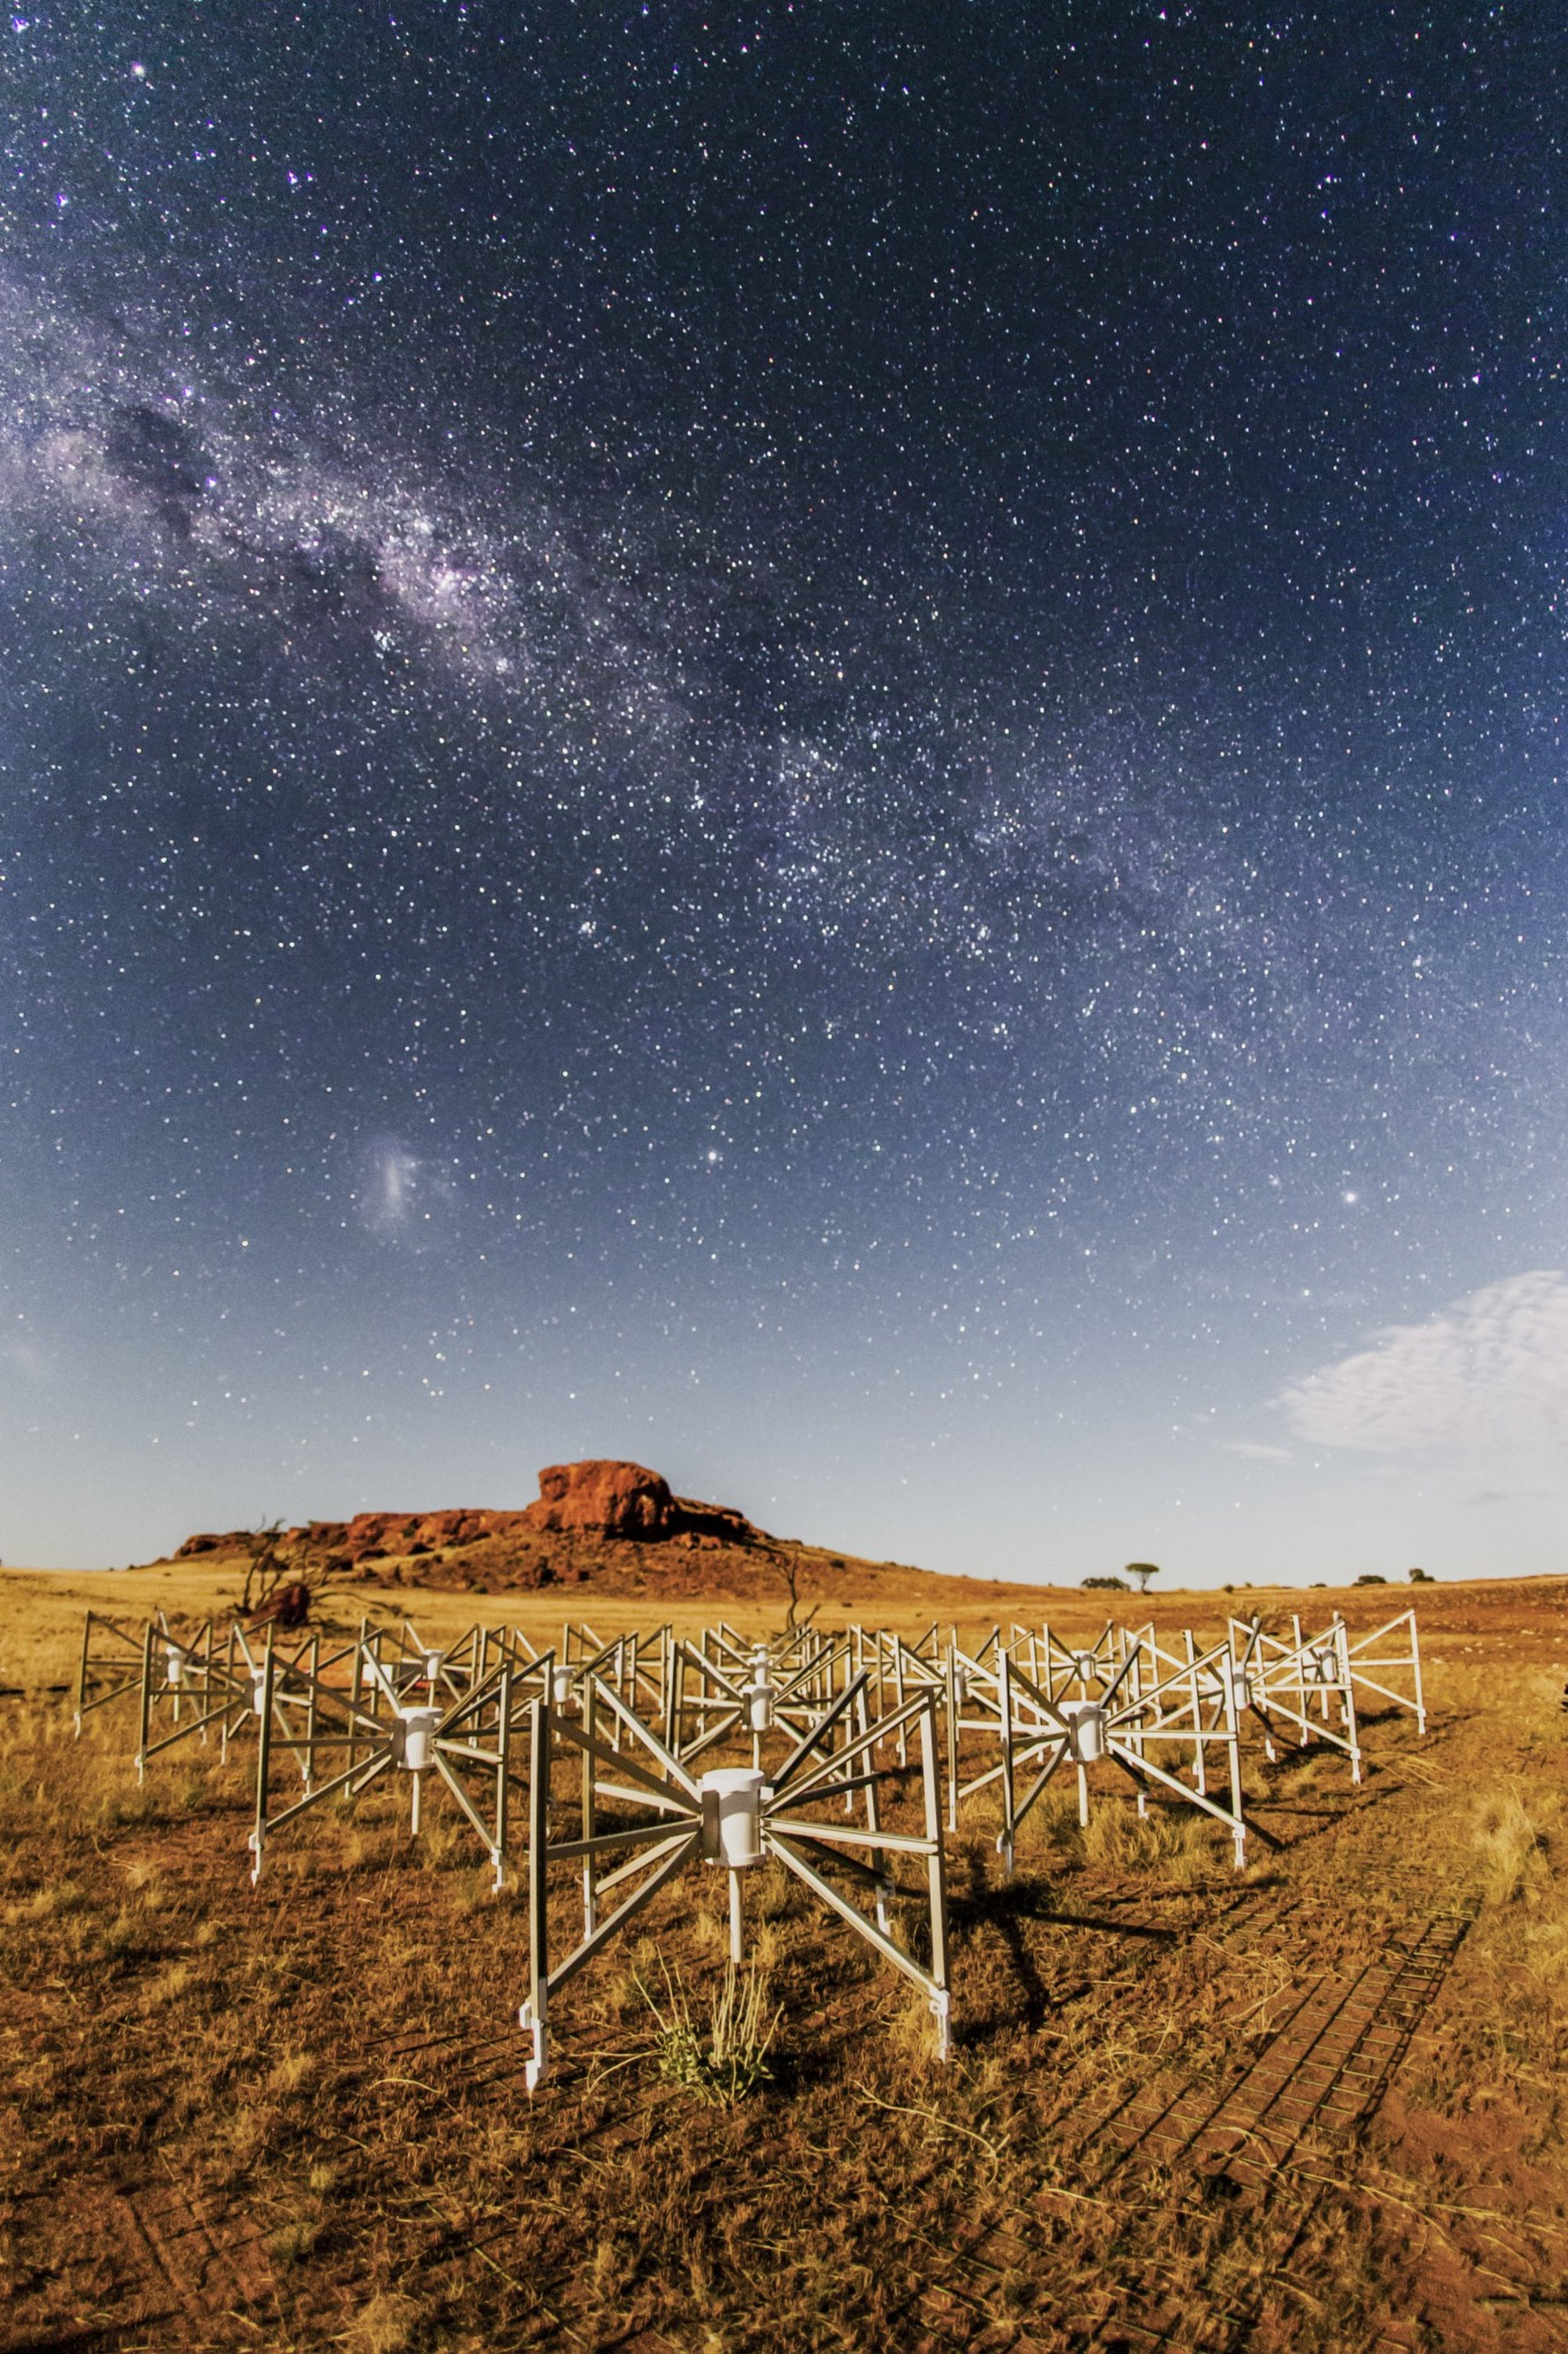 One of 256 tiles of the Murchison Widefield Array low-frequency radio telescope in Western Australia. Photo: Pete Wheeler, ICRAR